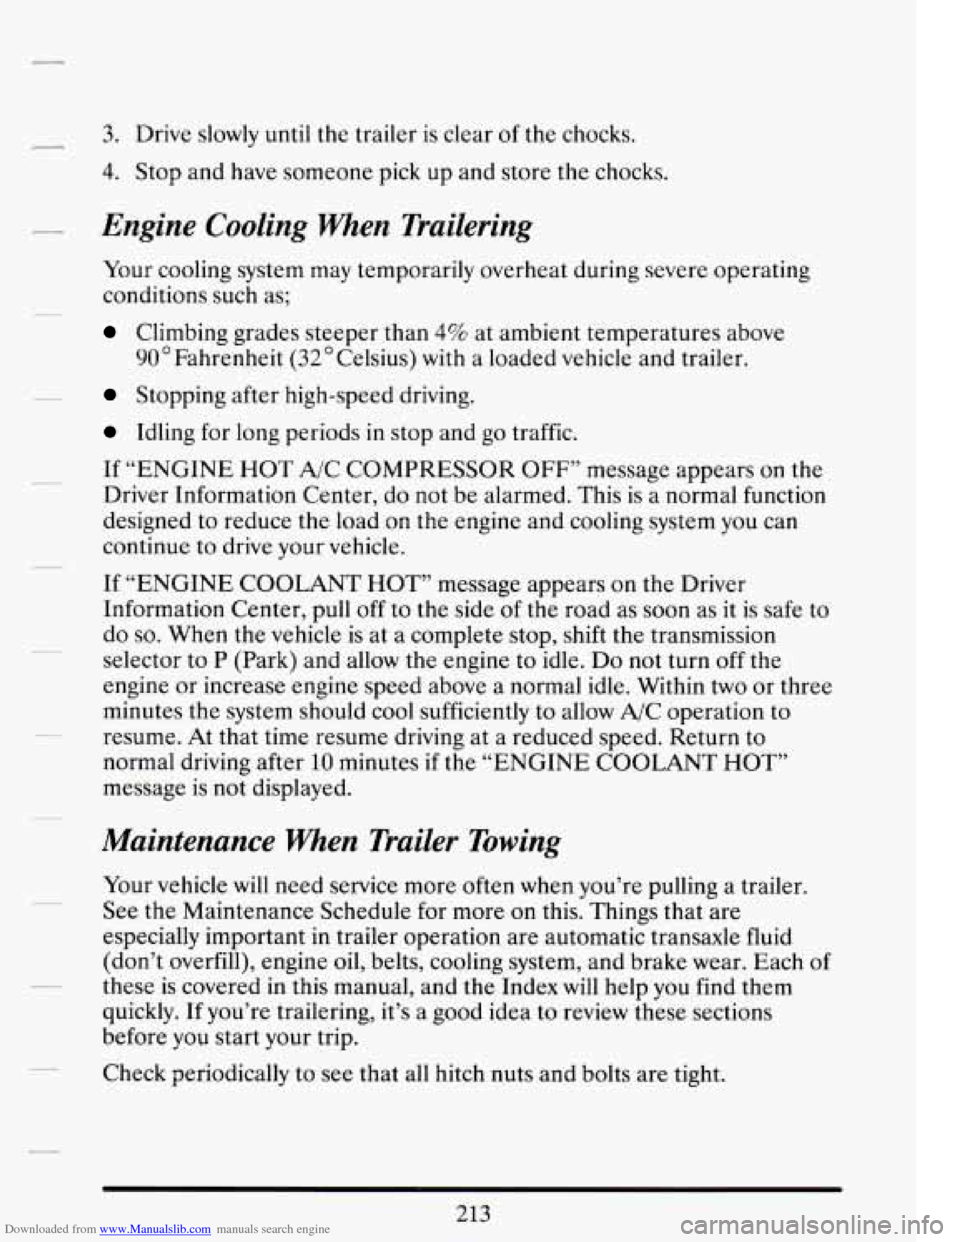 CADILLAC DEVILLE 1994 7.G Owners Manual Downloaded from www.Manualslib.com manuals search engine 3. Drive slowly  until the  trailer is clear  of the  chocks. 
4. Stop  and  have someone  pick up and  store  the  chocks. 
Engine  Cooling  W